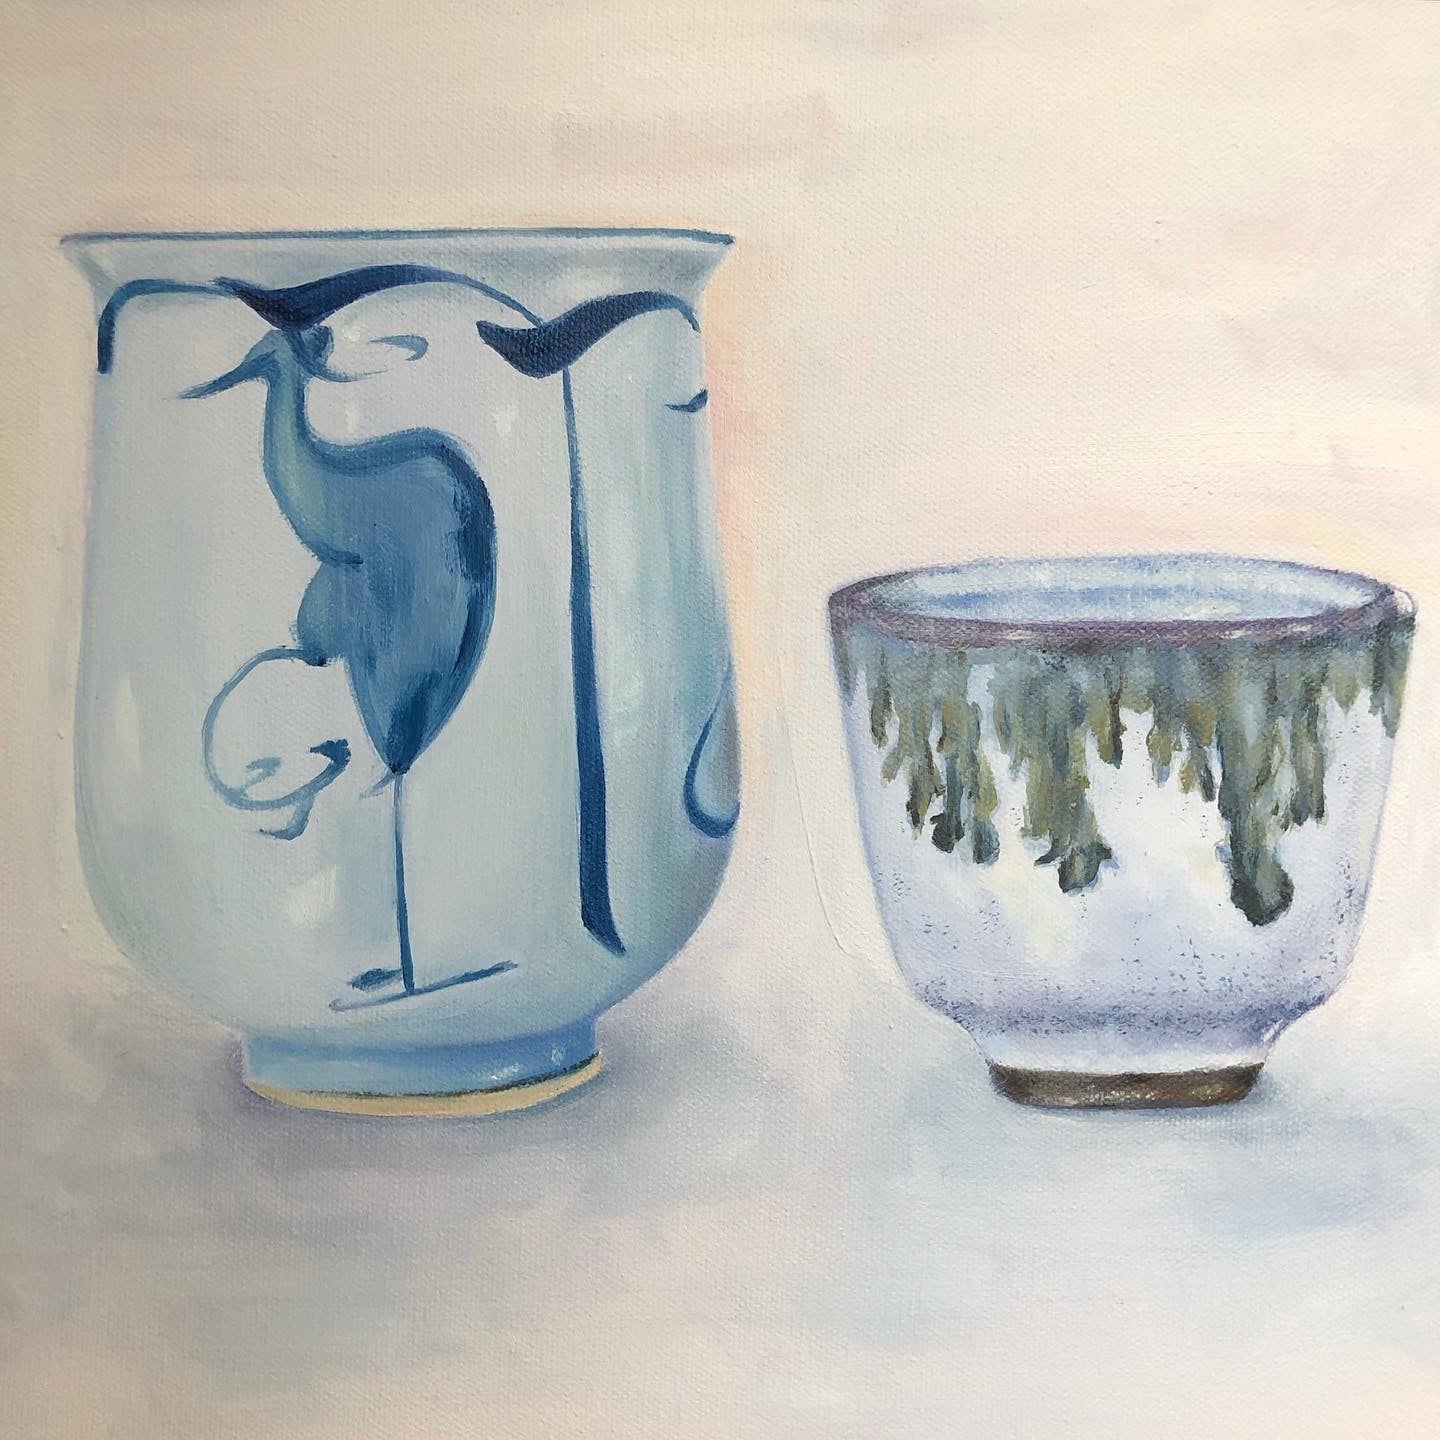 oil painting of two traditional Japanese ceramic sake cups, including crane